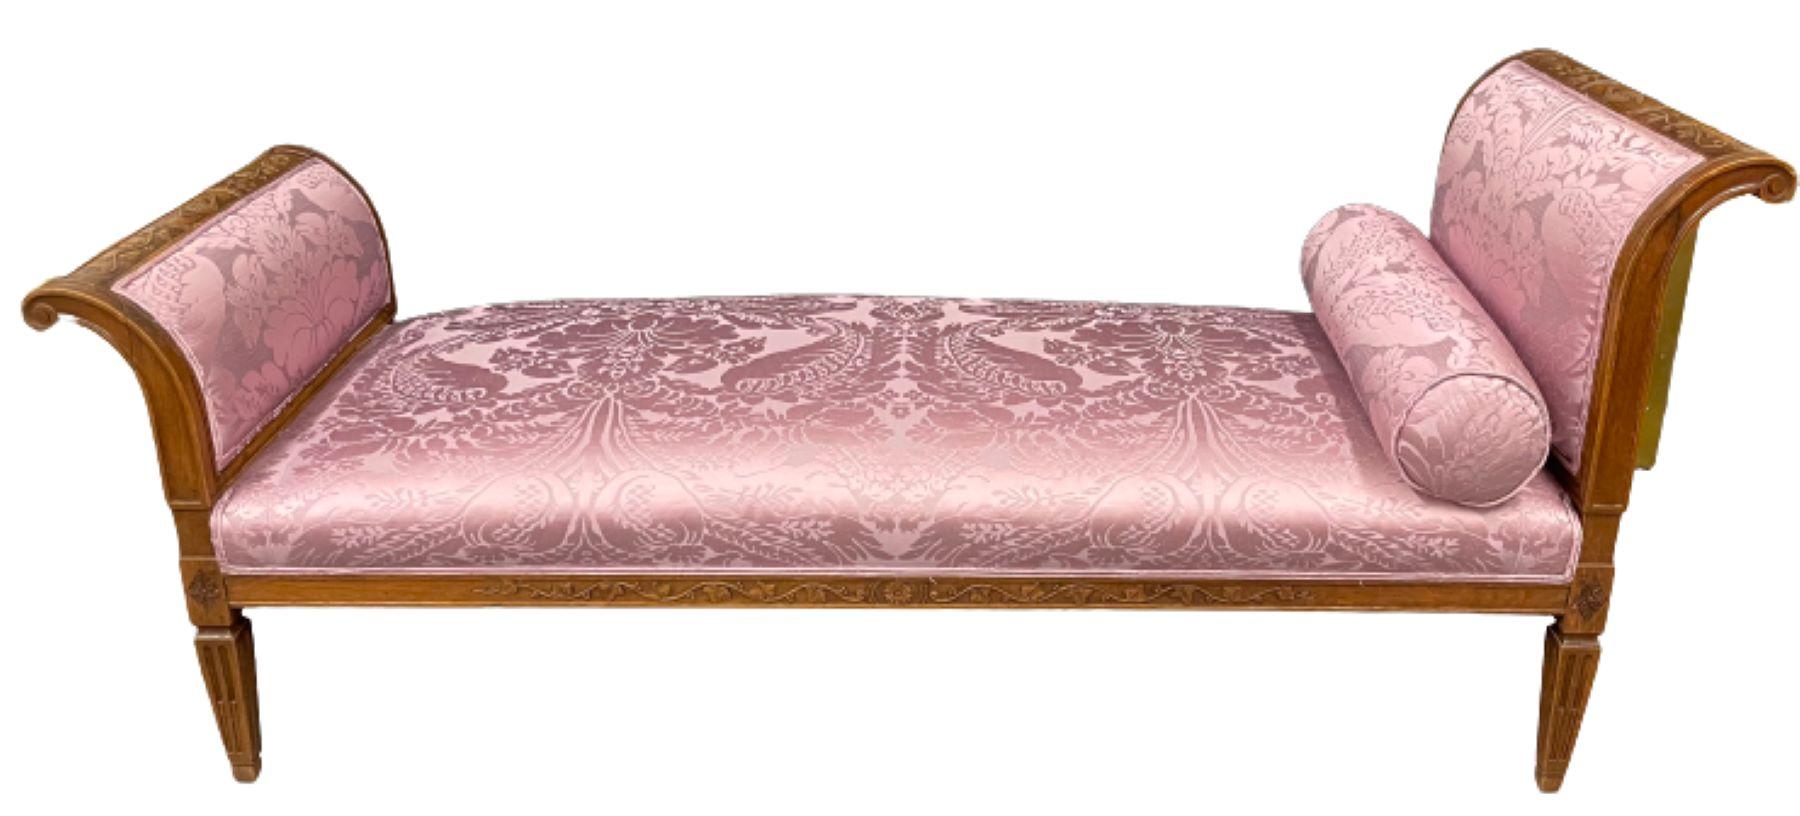 Hollywood Regency Chaise Lounge or Day Bed in Scalamandre Upholstery. Fine early mahogany frame that is strong and sturdy covered in a wonderfully upholstered Scalamandre fabric having double welts.